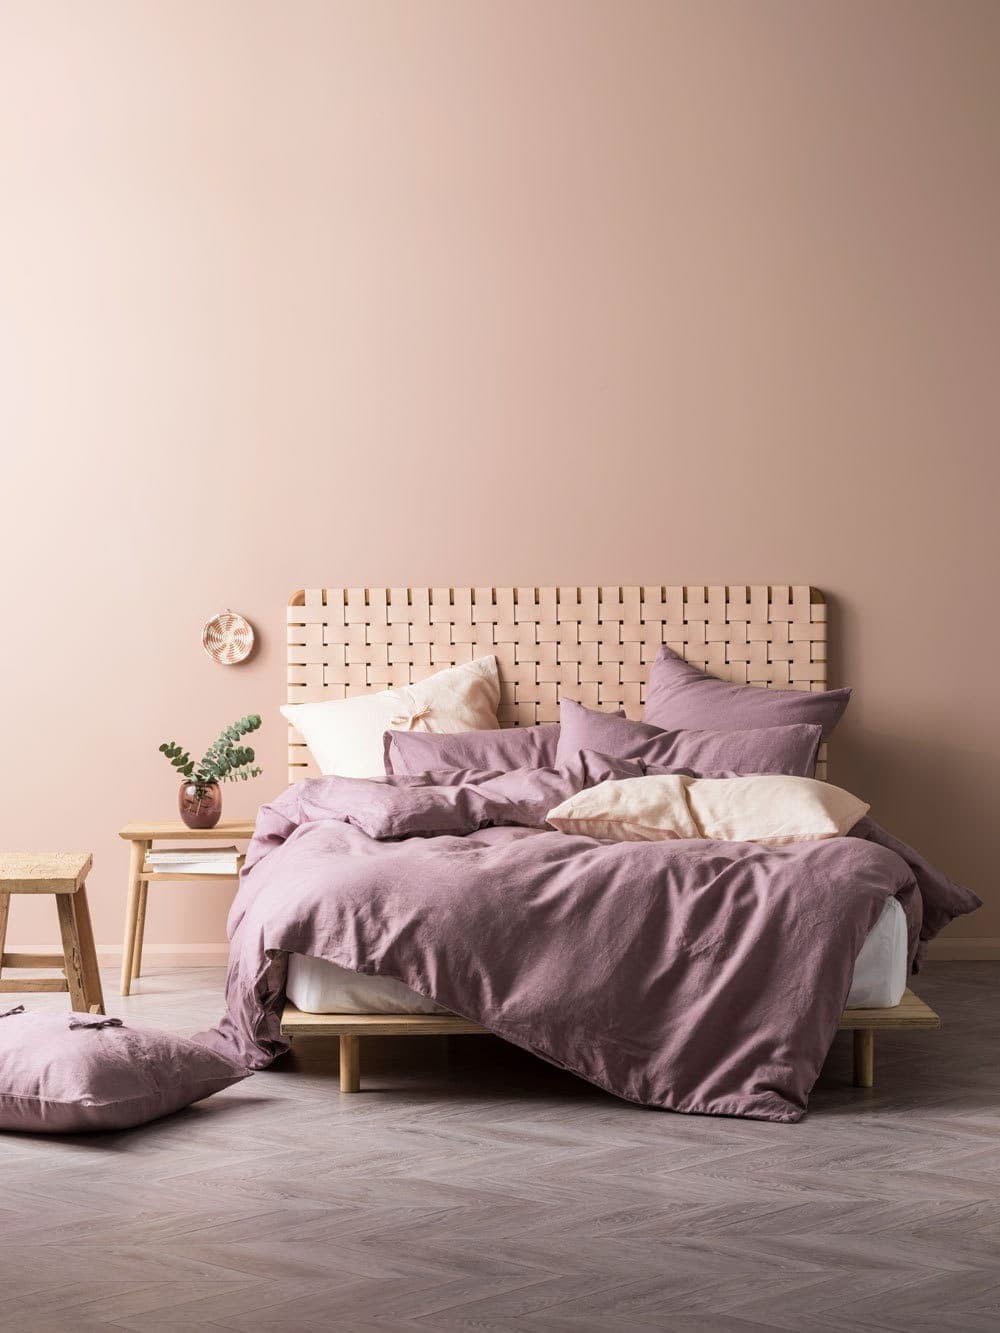 nimes bedding from linen house in dusty pink bedroom ideas